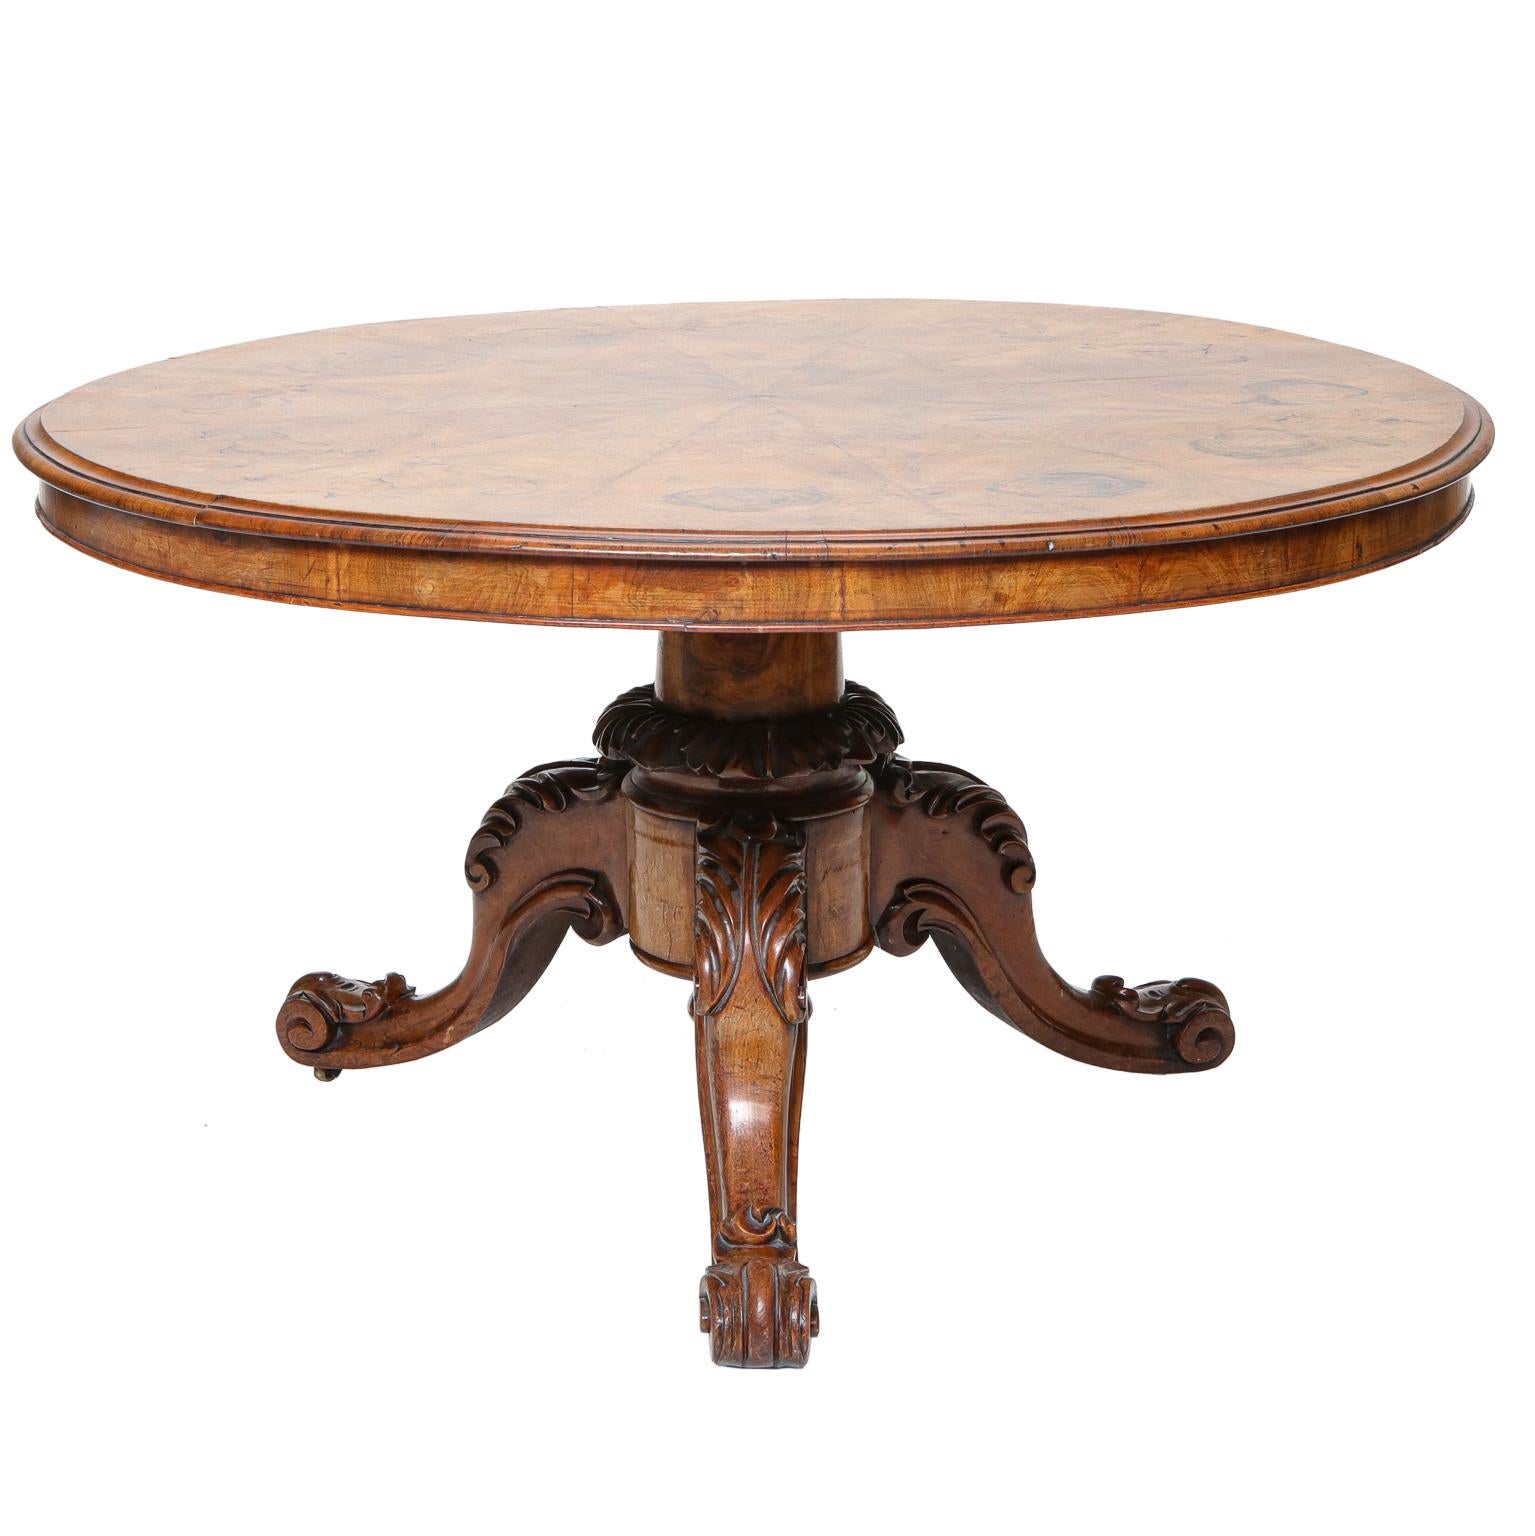 19th century circular walnut tip top center table with burl veneered pie crust top and base having a carved column on three cabriole legs with acanthus carved knees and carved scroll feet, circa 1860-1870. 52